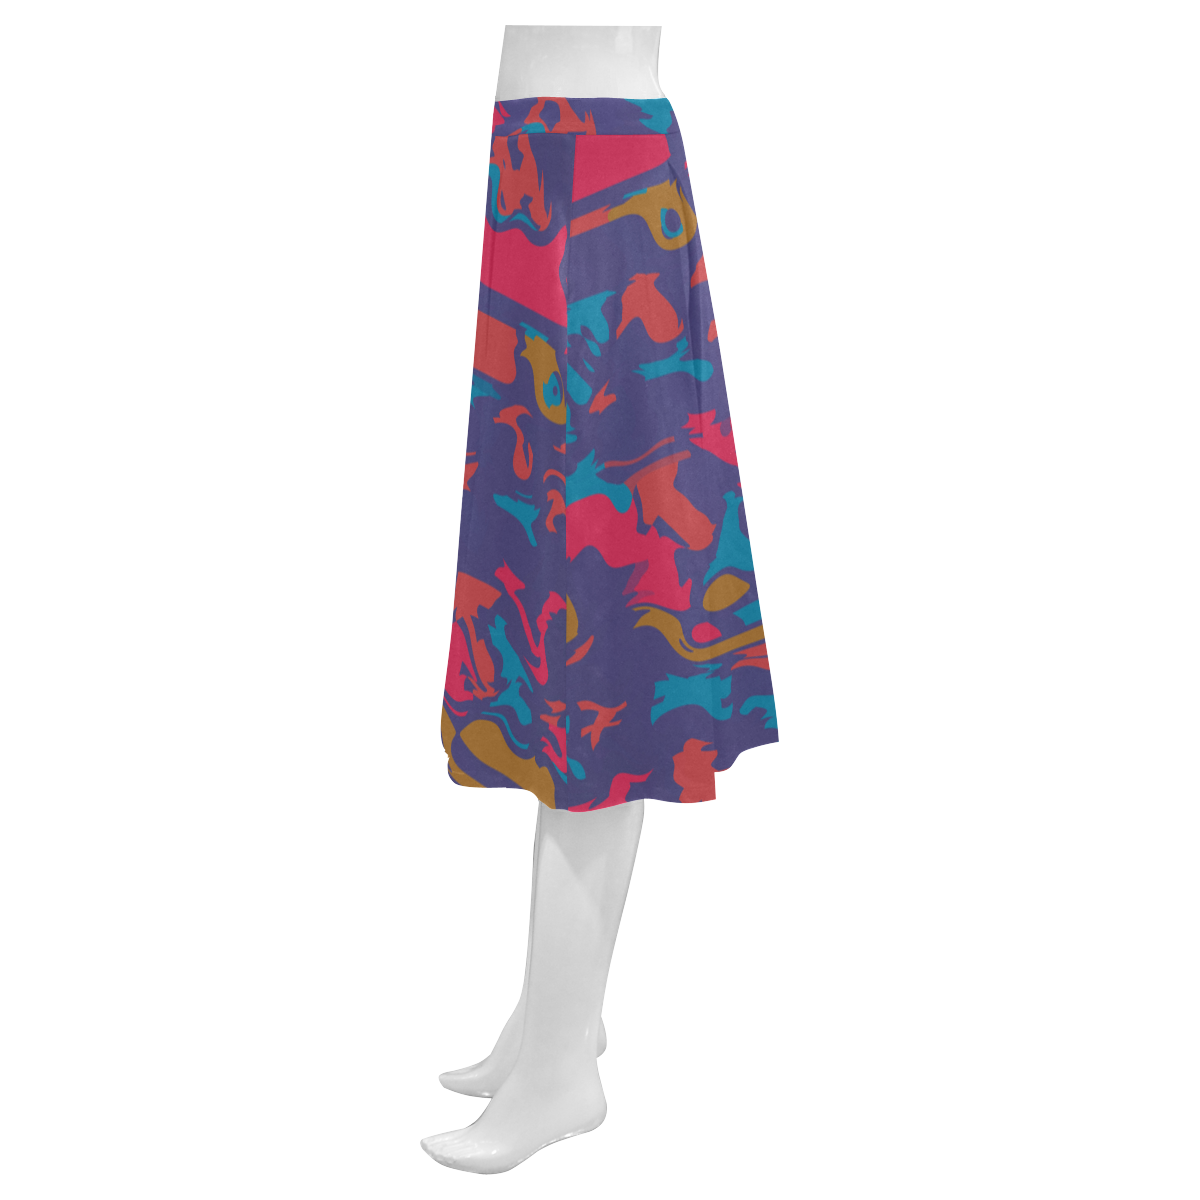 Chaos in retro colors Mnemosyne Women's Crepe Skirt (Model D16)